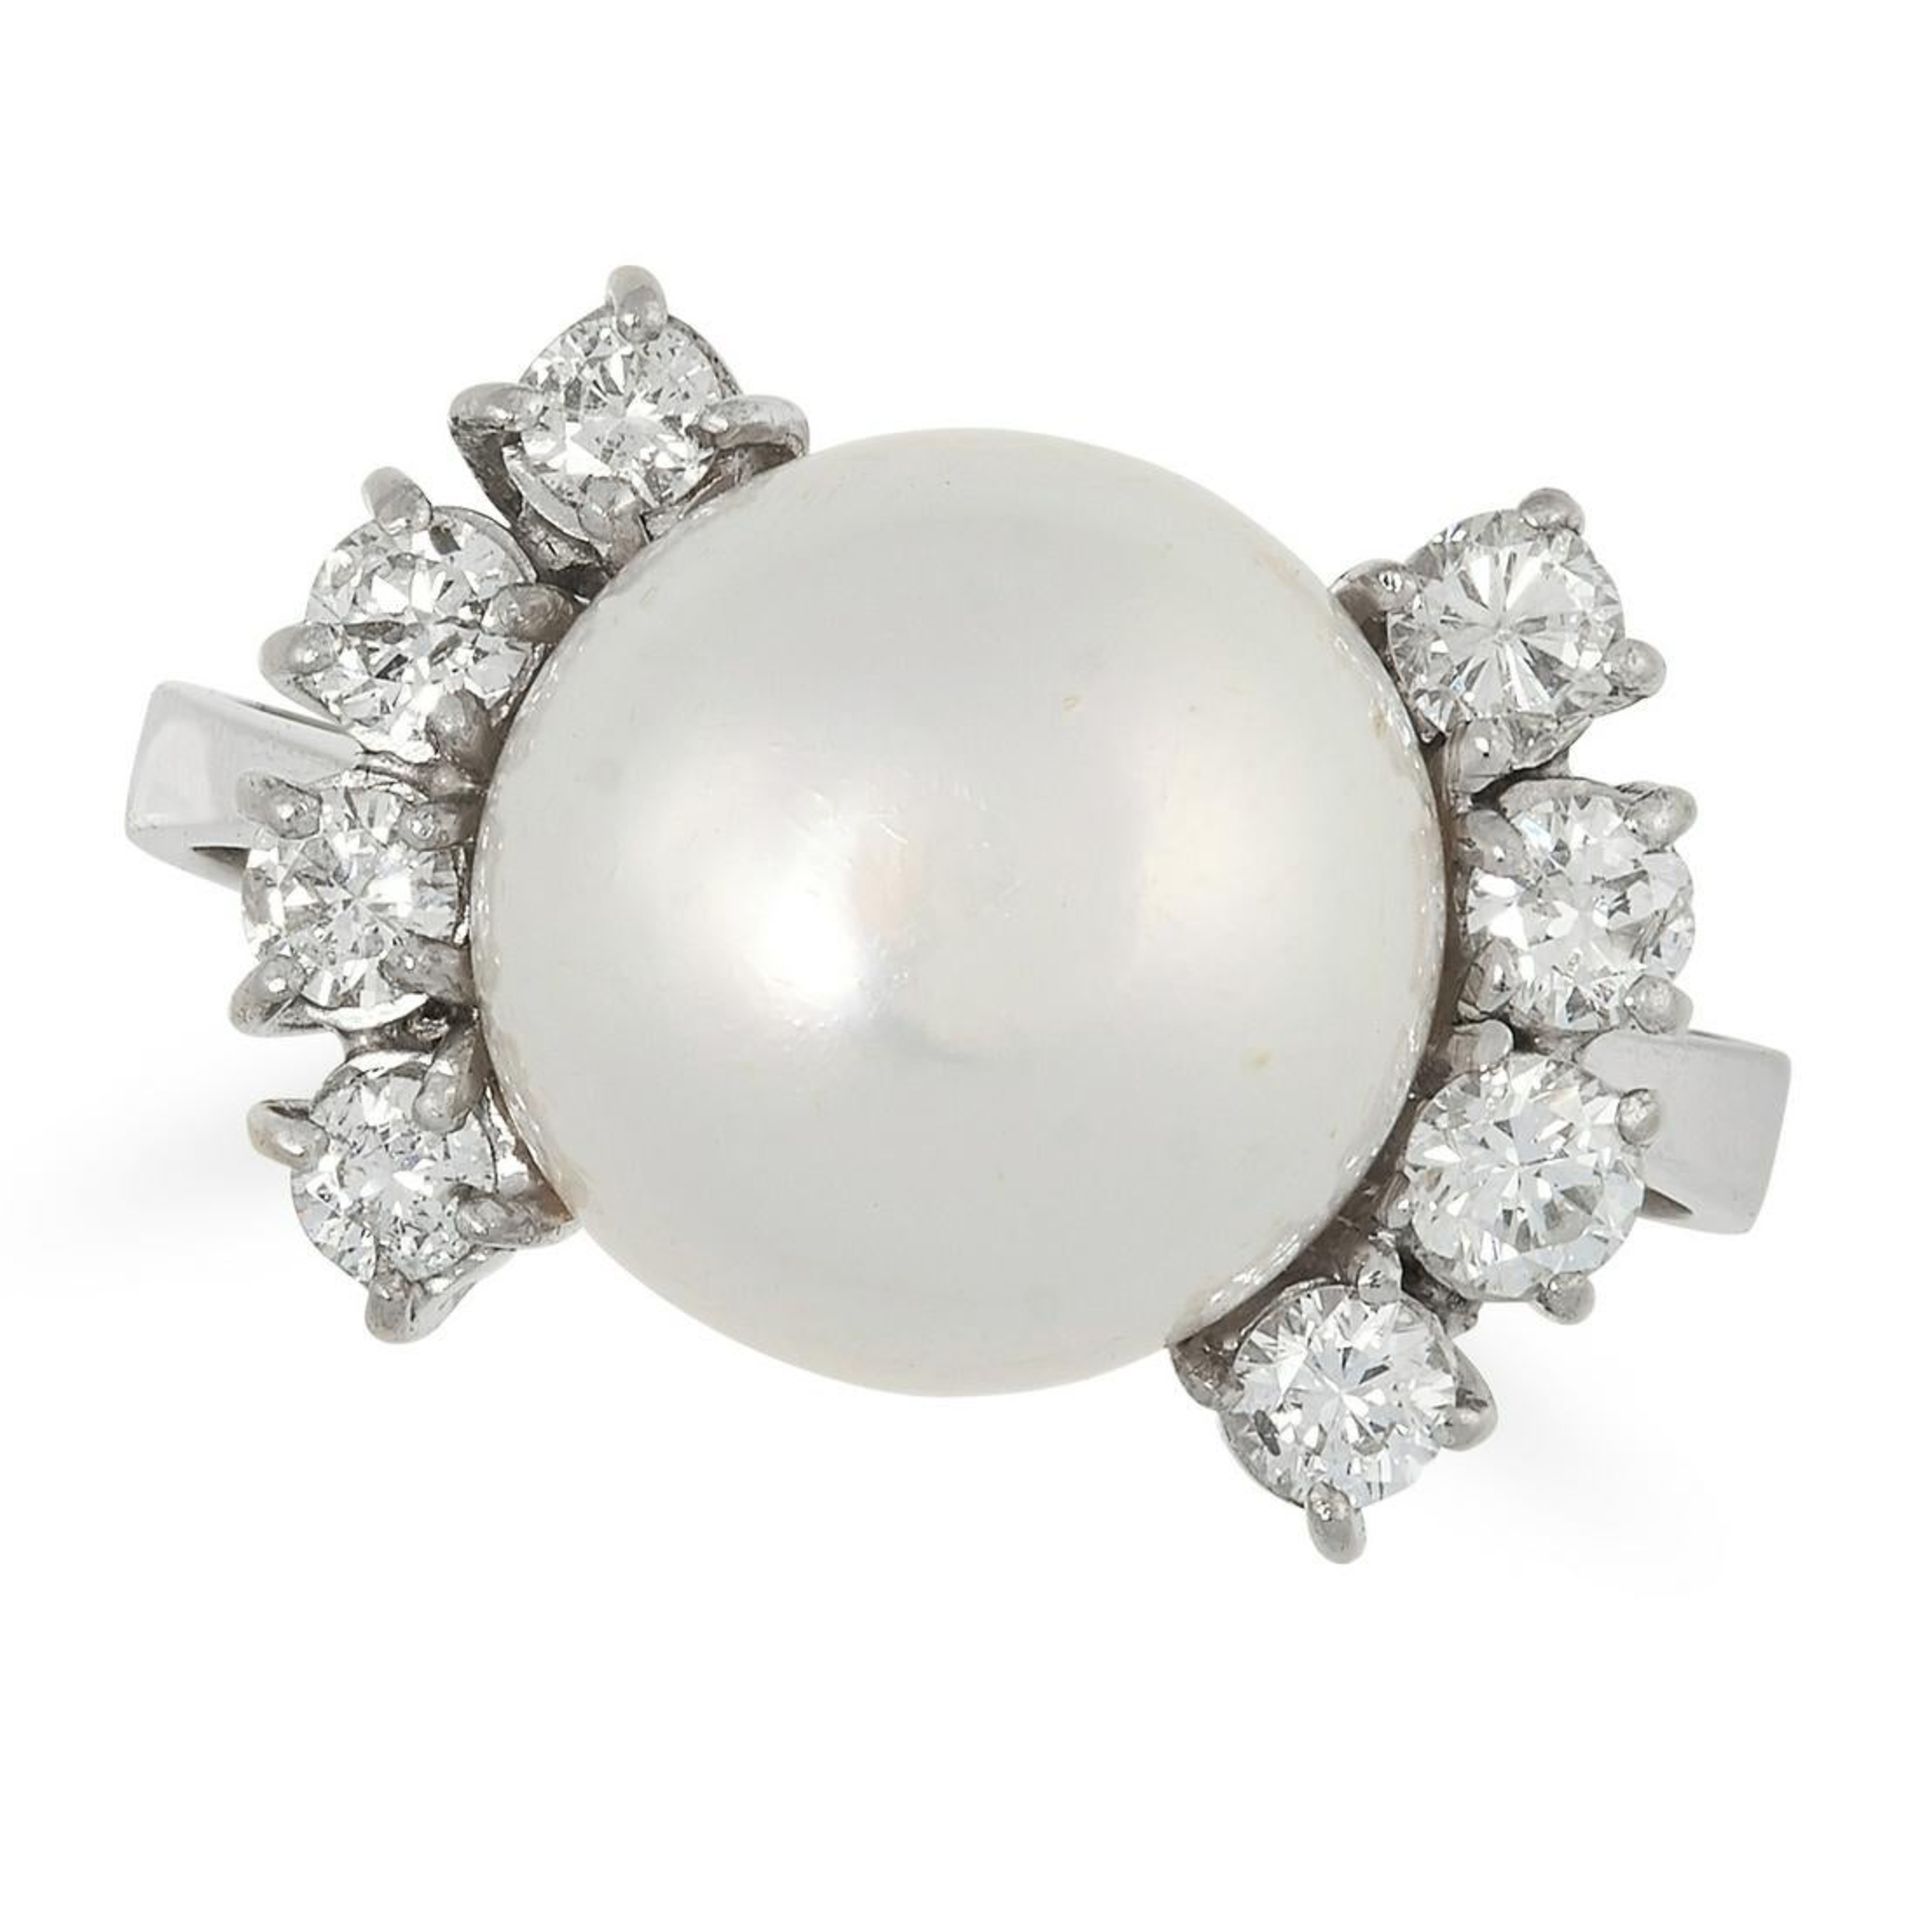 A PEARL AND DIAMOND DRESS RING set with a central pearl with wings of four round brilliant cut